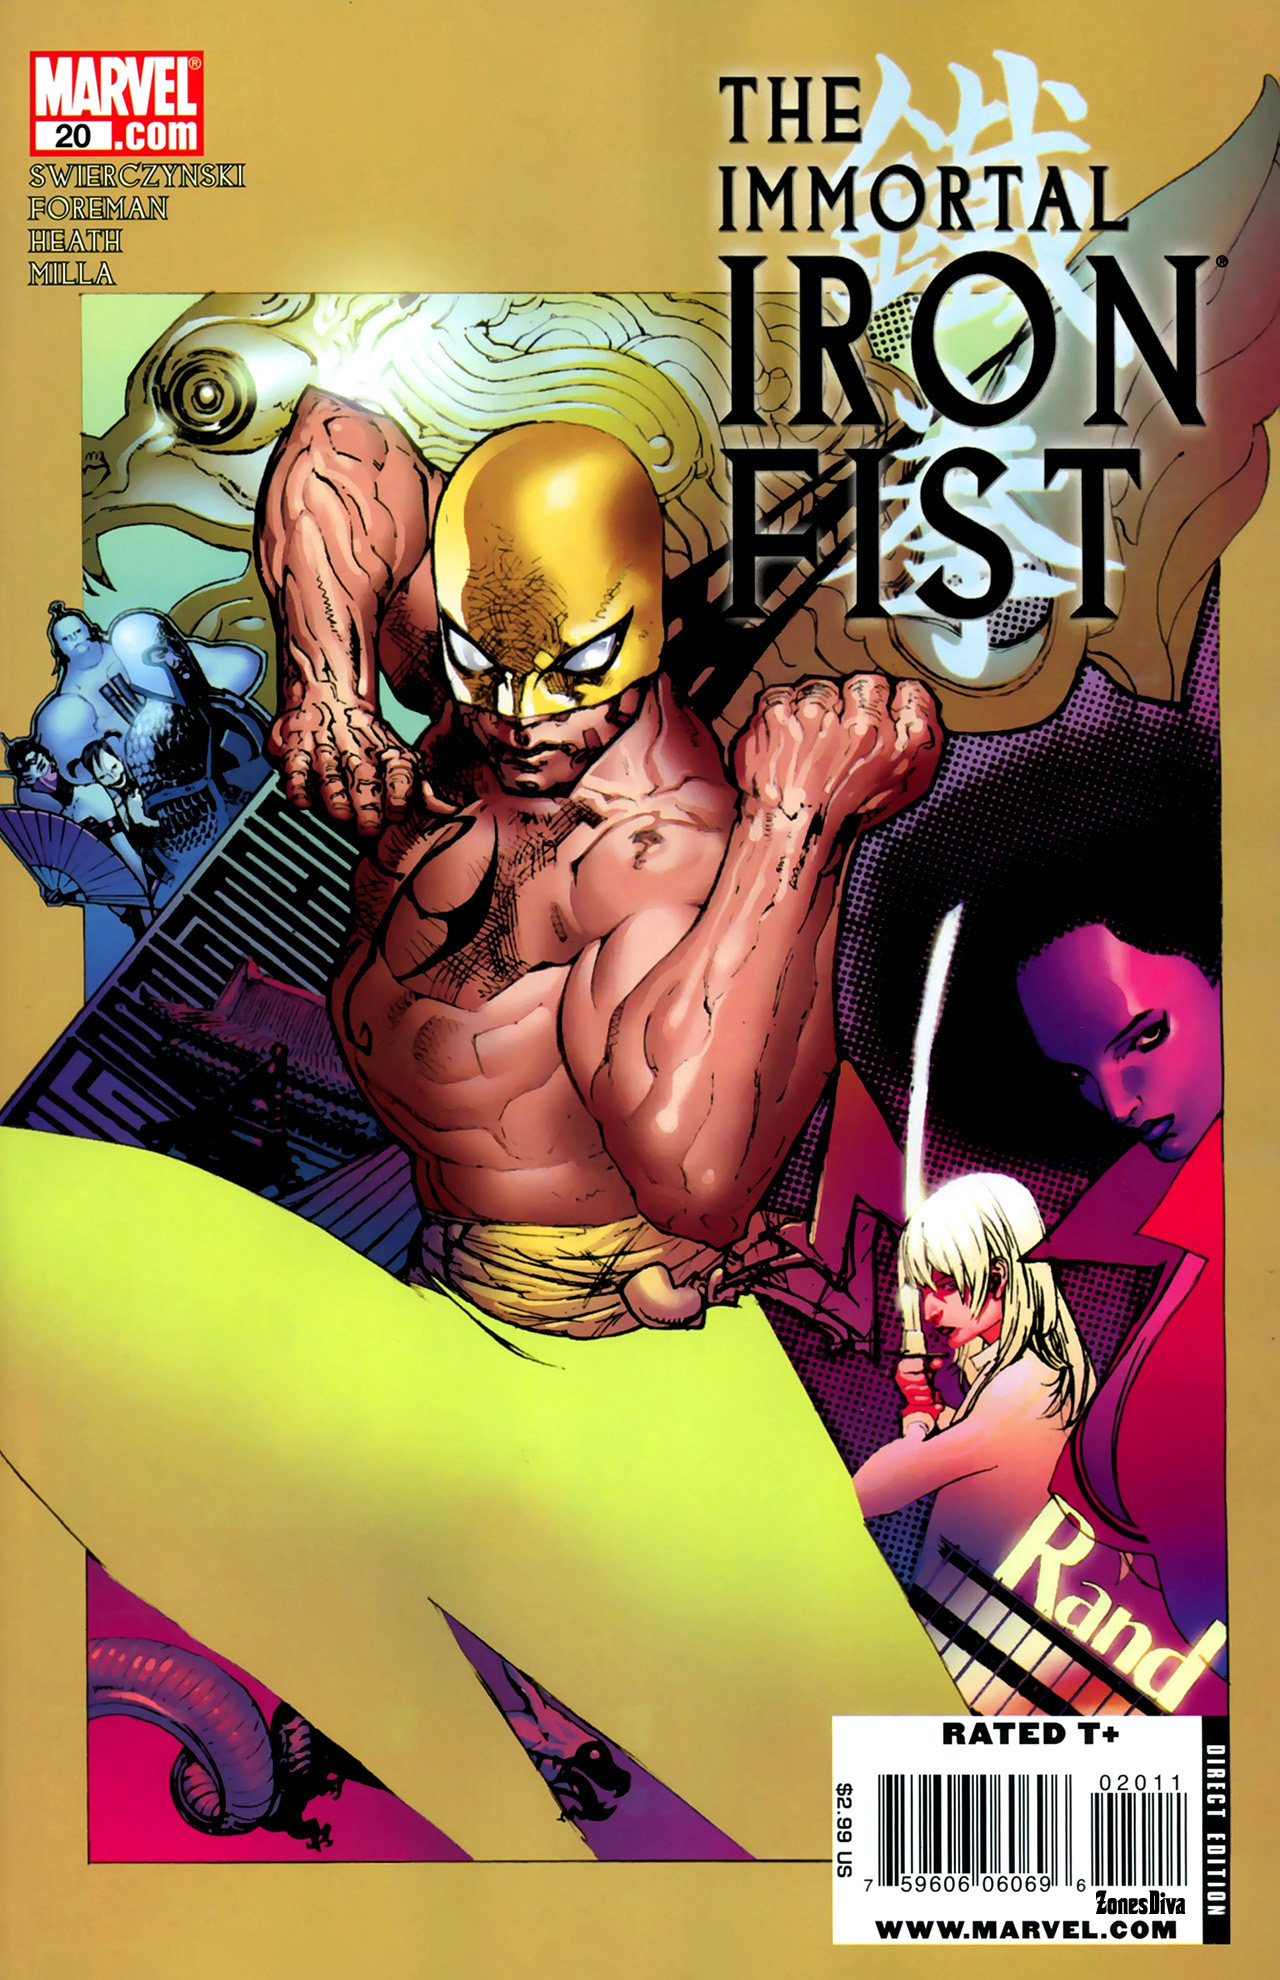 Amazing Immortal Iron Fist Pictures & Backgrounds